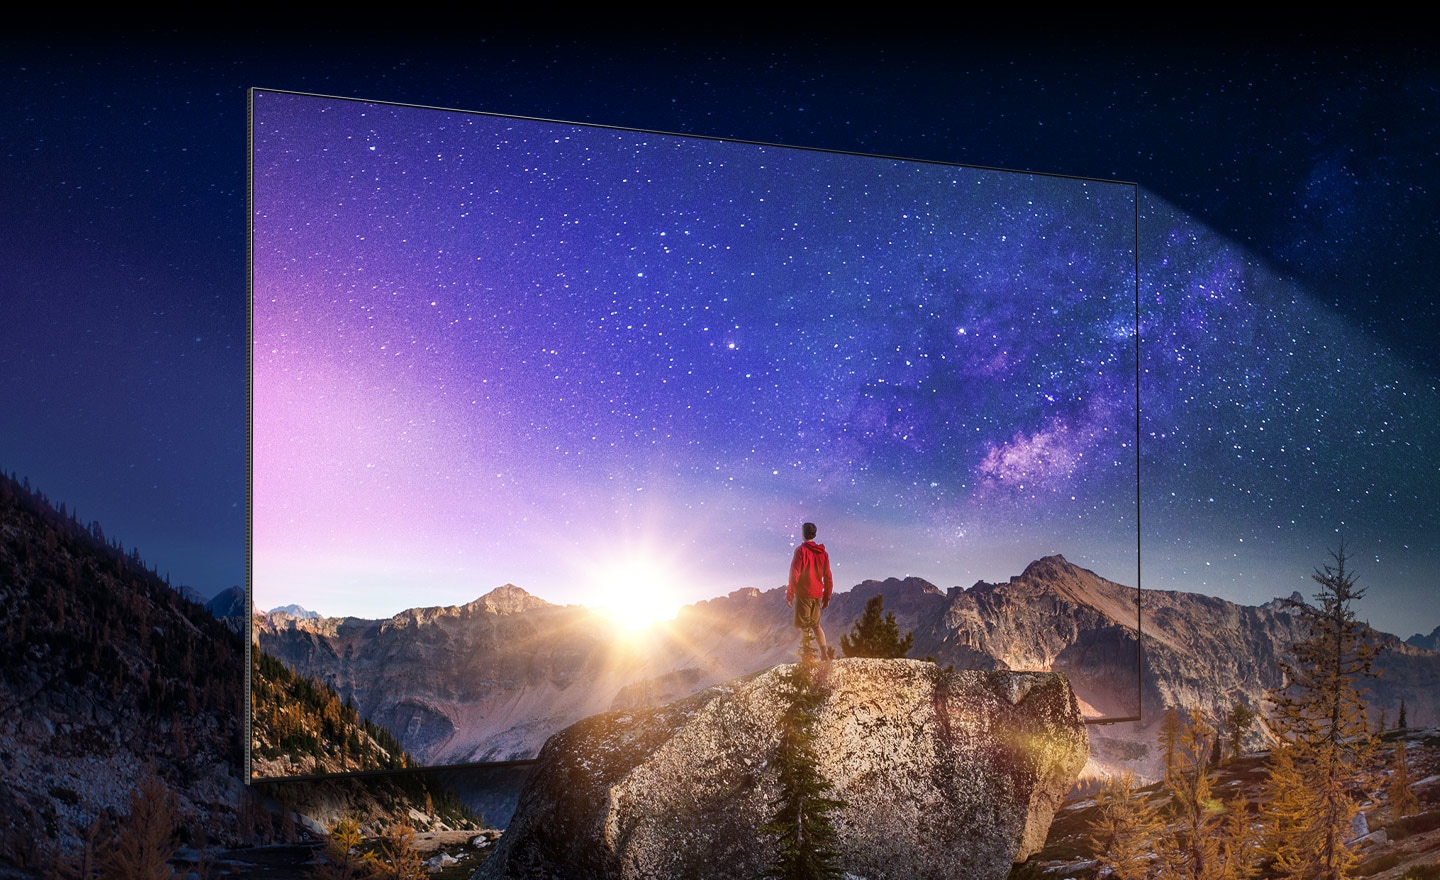 A man is on top of a mountain looking at a magnificent view. QLED's nearly bezel-less frame appears to show the stellar picture and clear contrast.